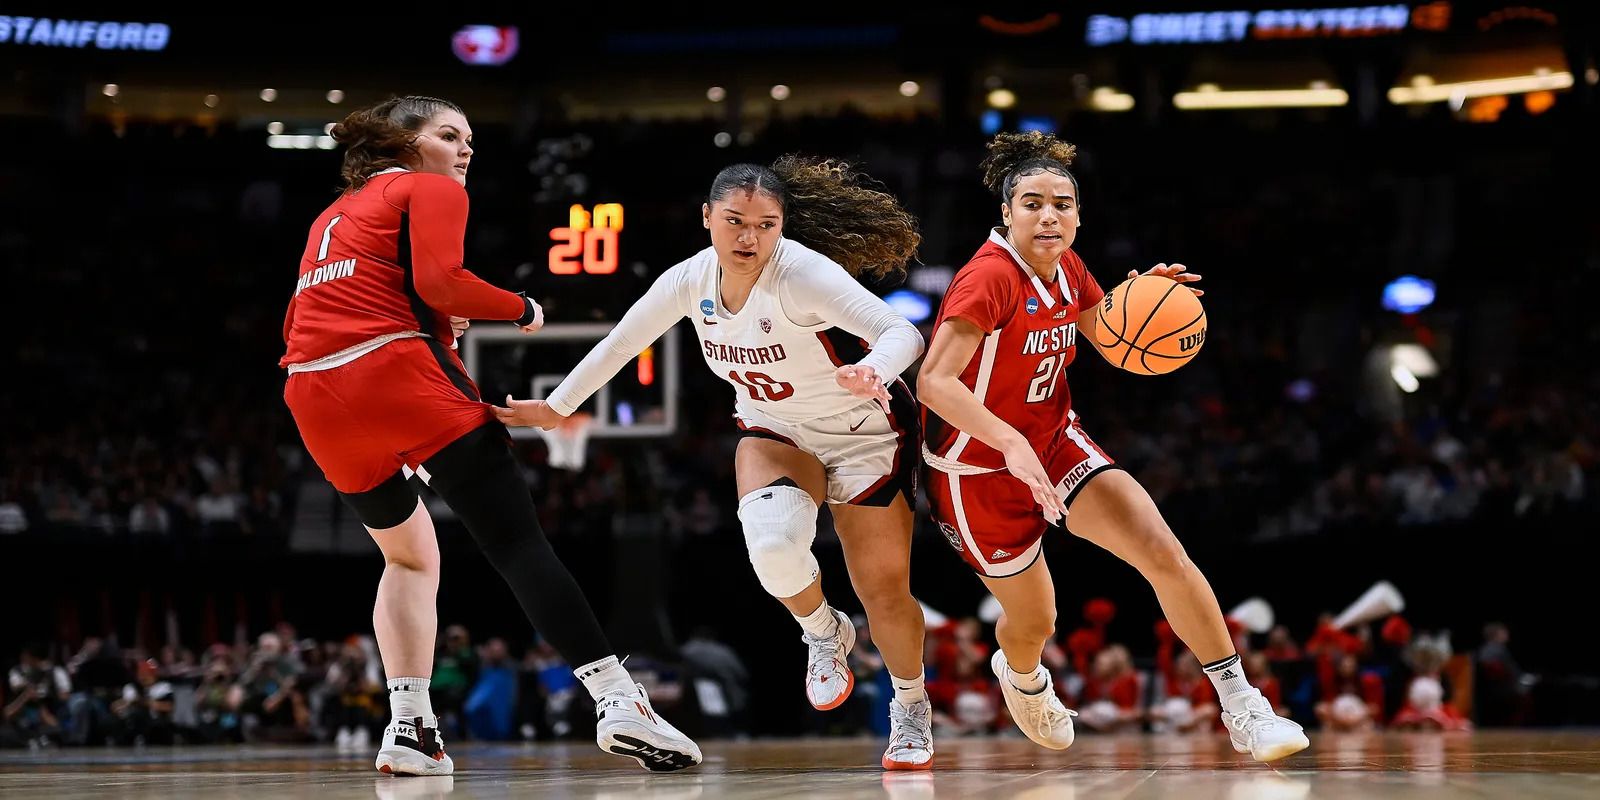 North Carolina State Wolfpack (Women) vs. South Carolina Gamecocks (Women): Preview, Where to Watch and Betting Odds